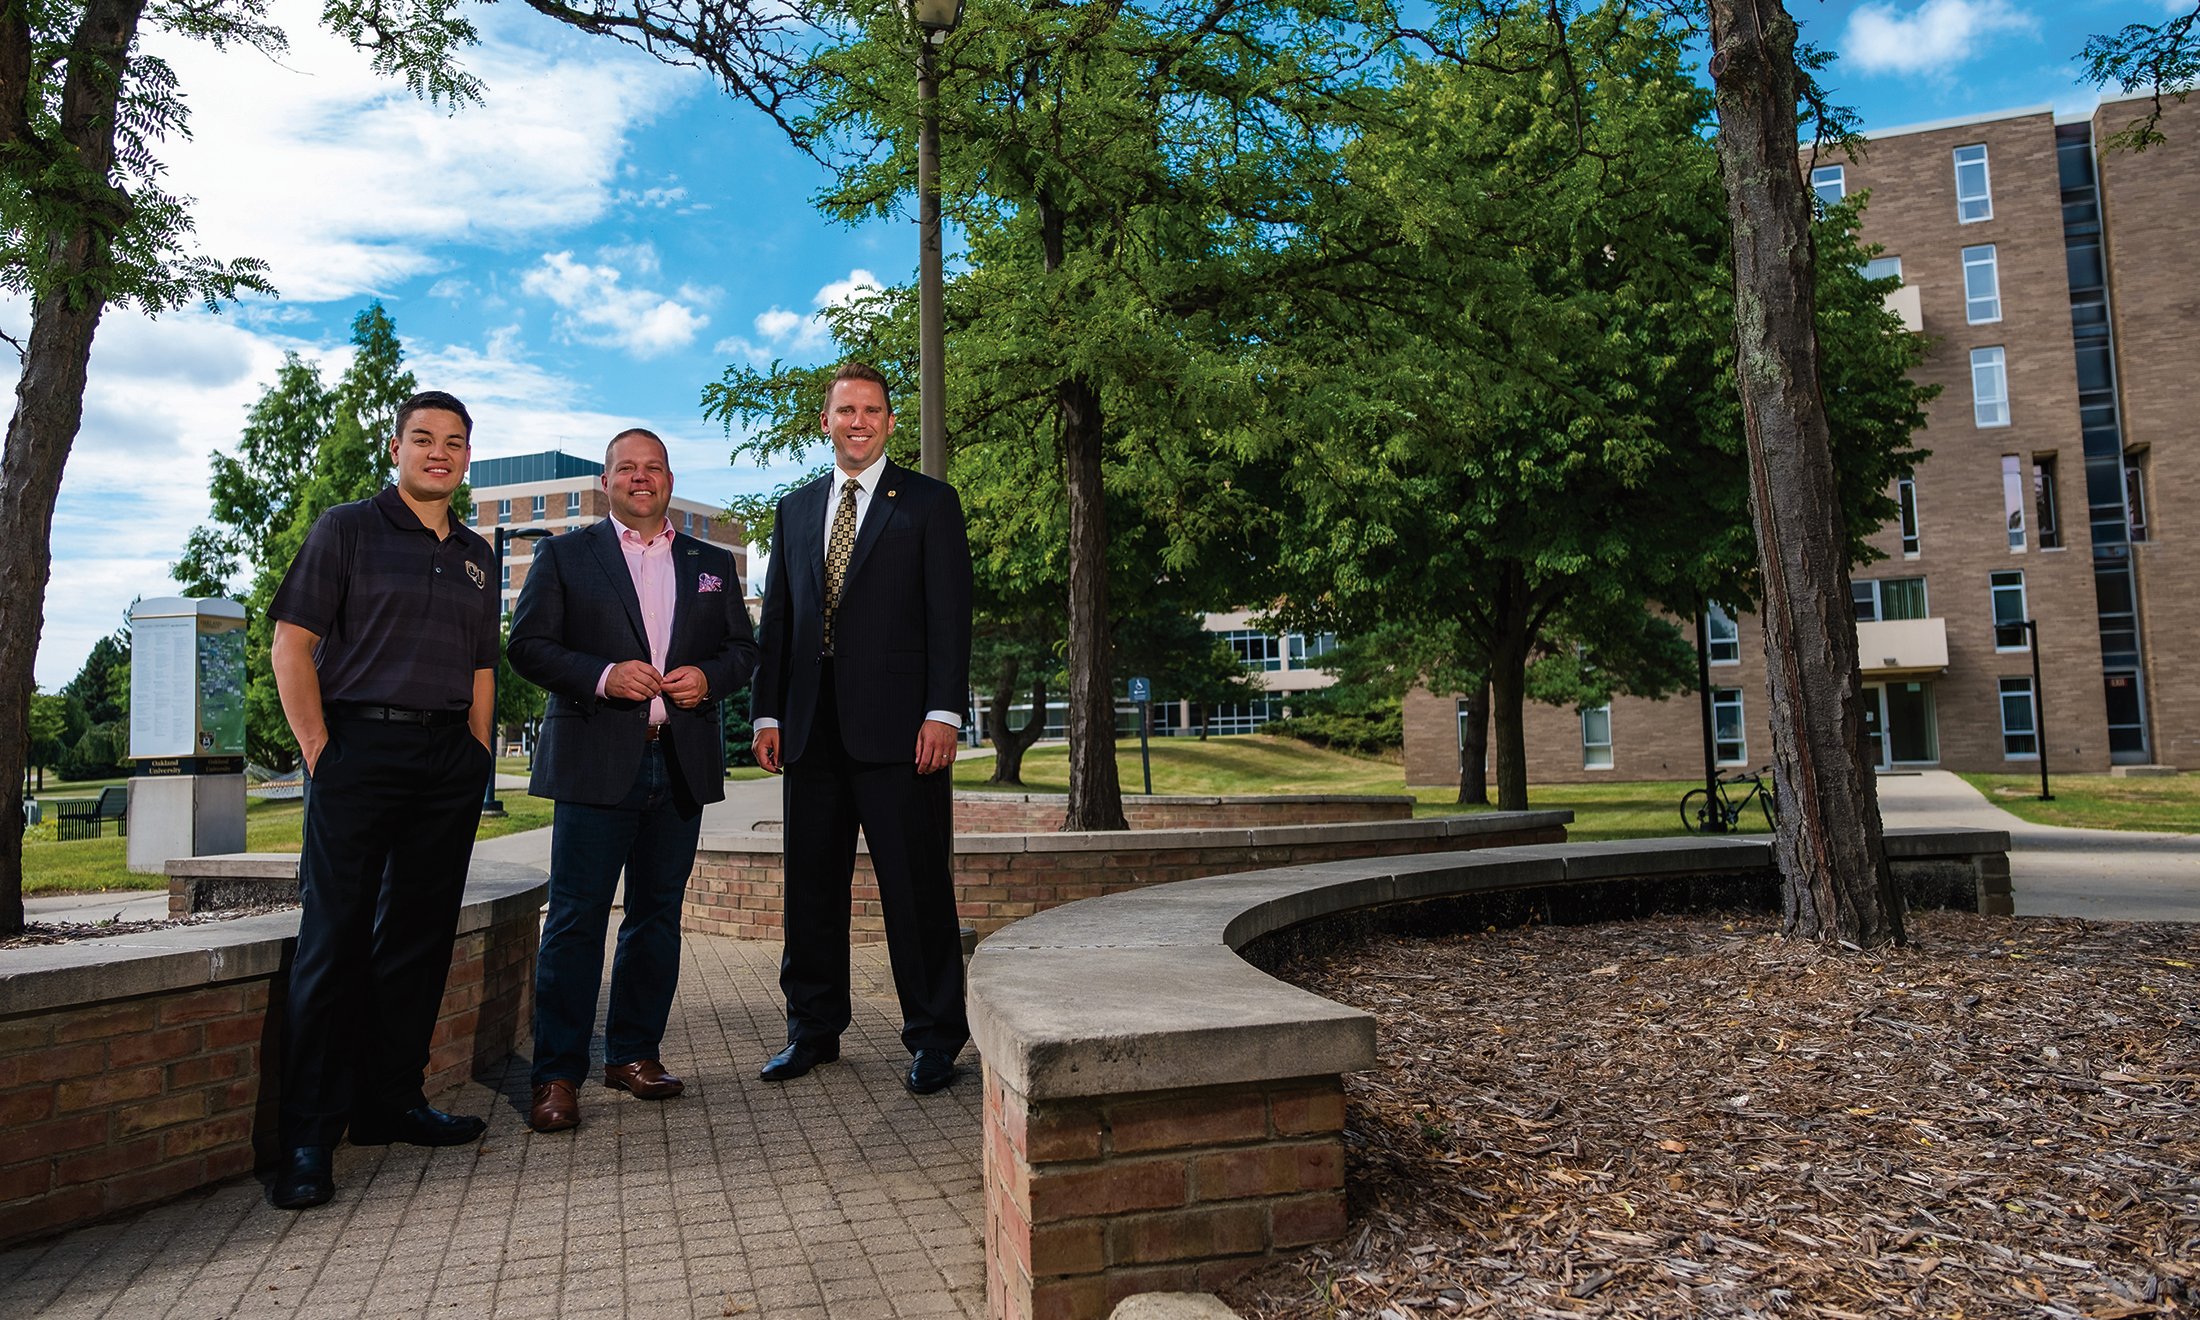 Mayor Rob Ray of Auburn Hills, Mayor Bryan Barnett of Rochester Hills  and Mayor Kevin McDaniel of Rochester stand together on OU's campus.